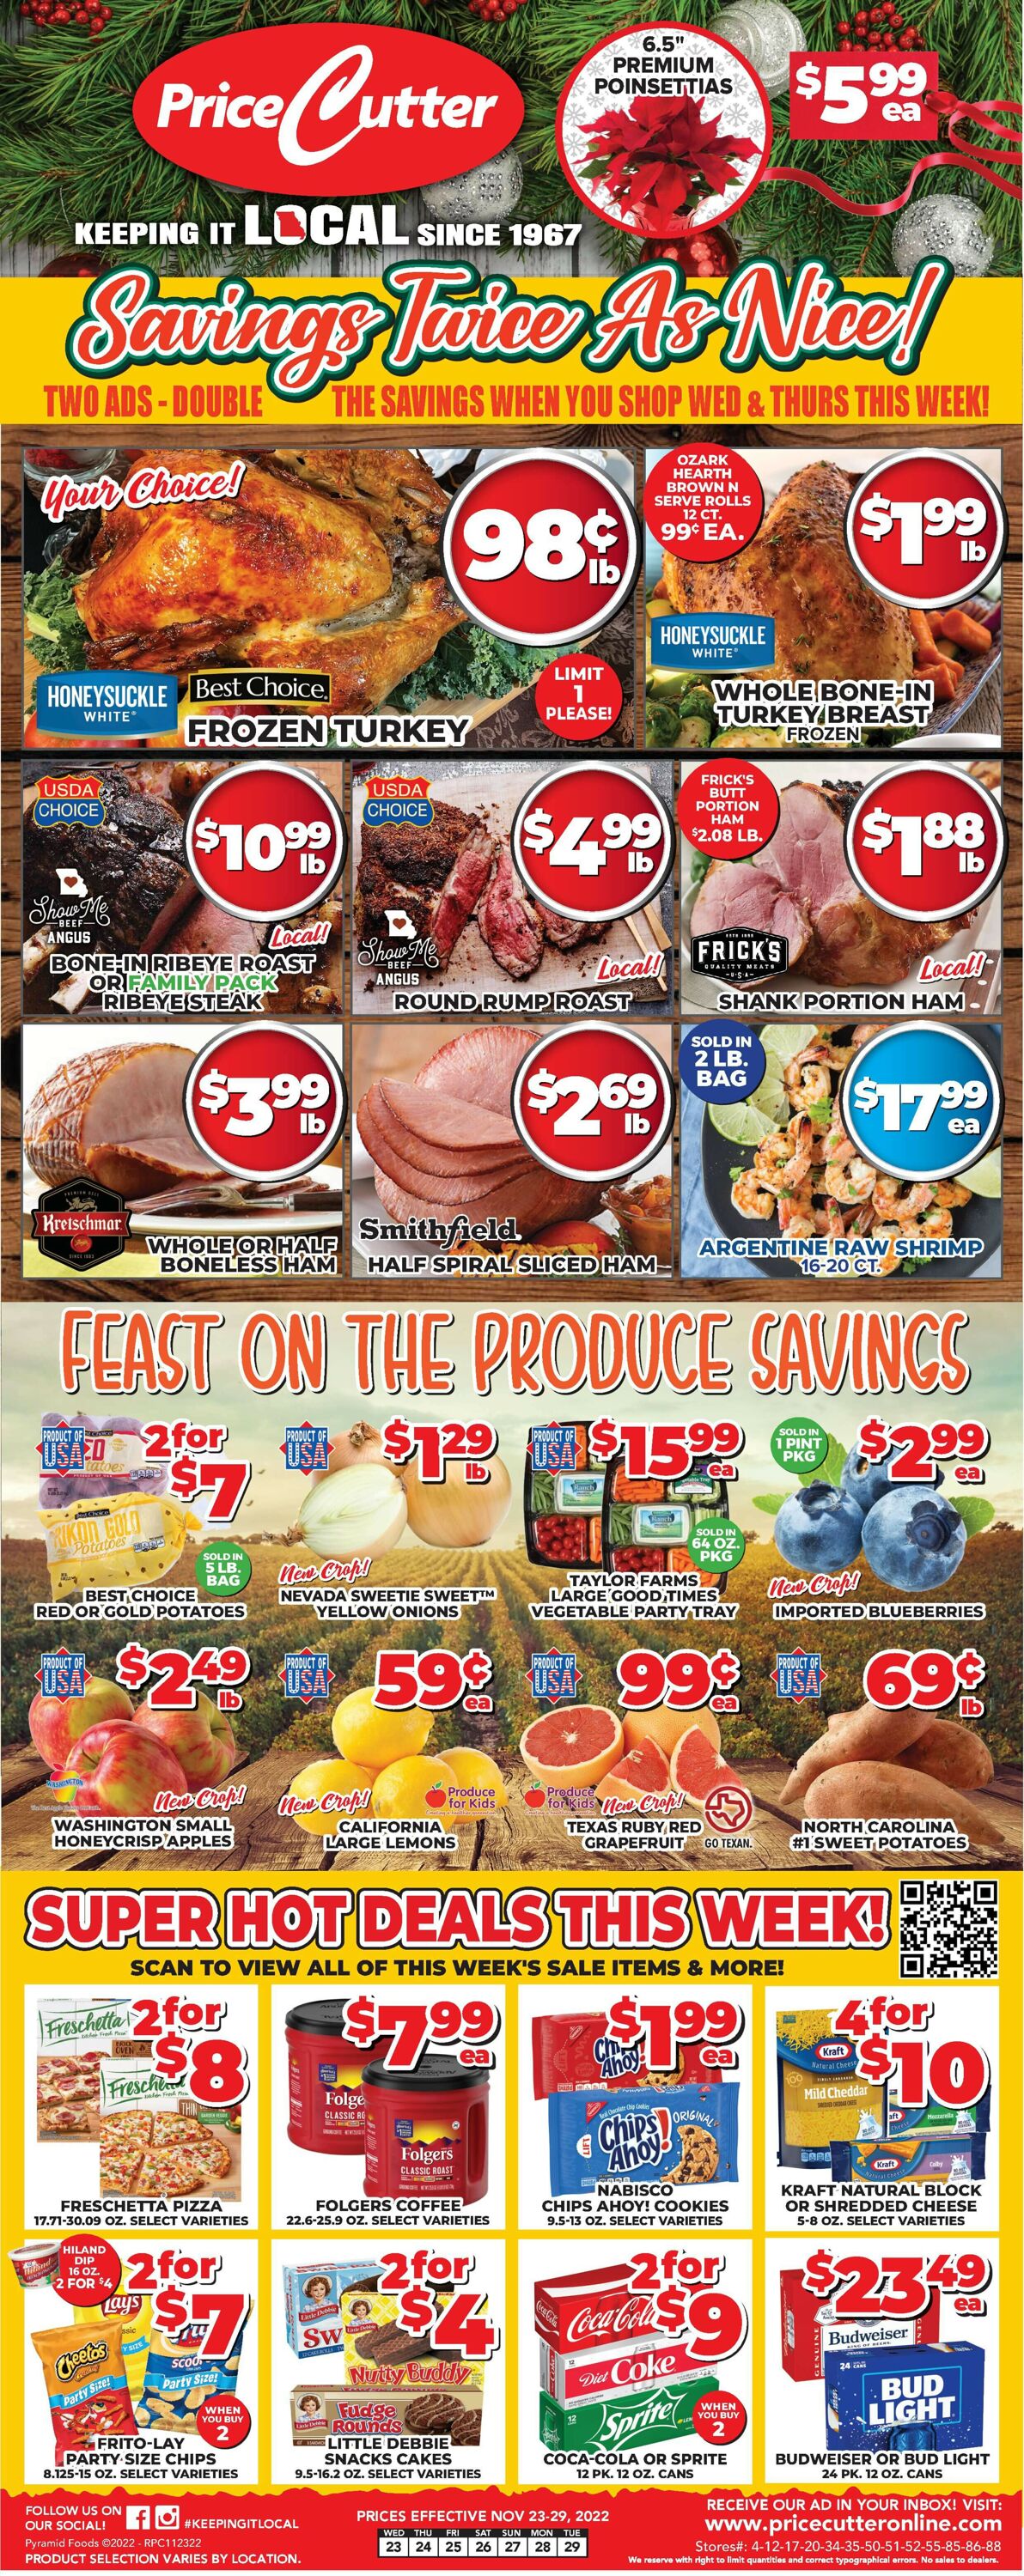 Price Cutter Weekly Ad Circular - valid 11/23-11/29/2022